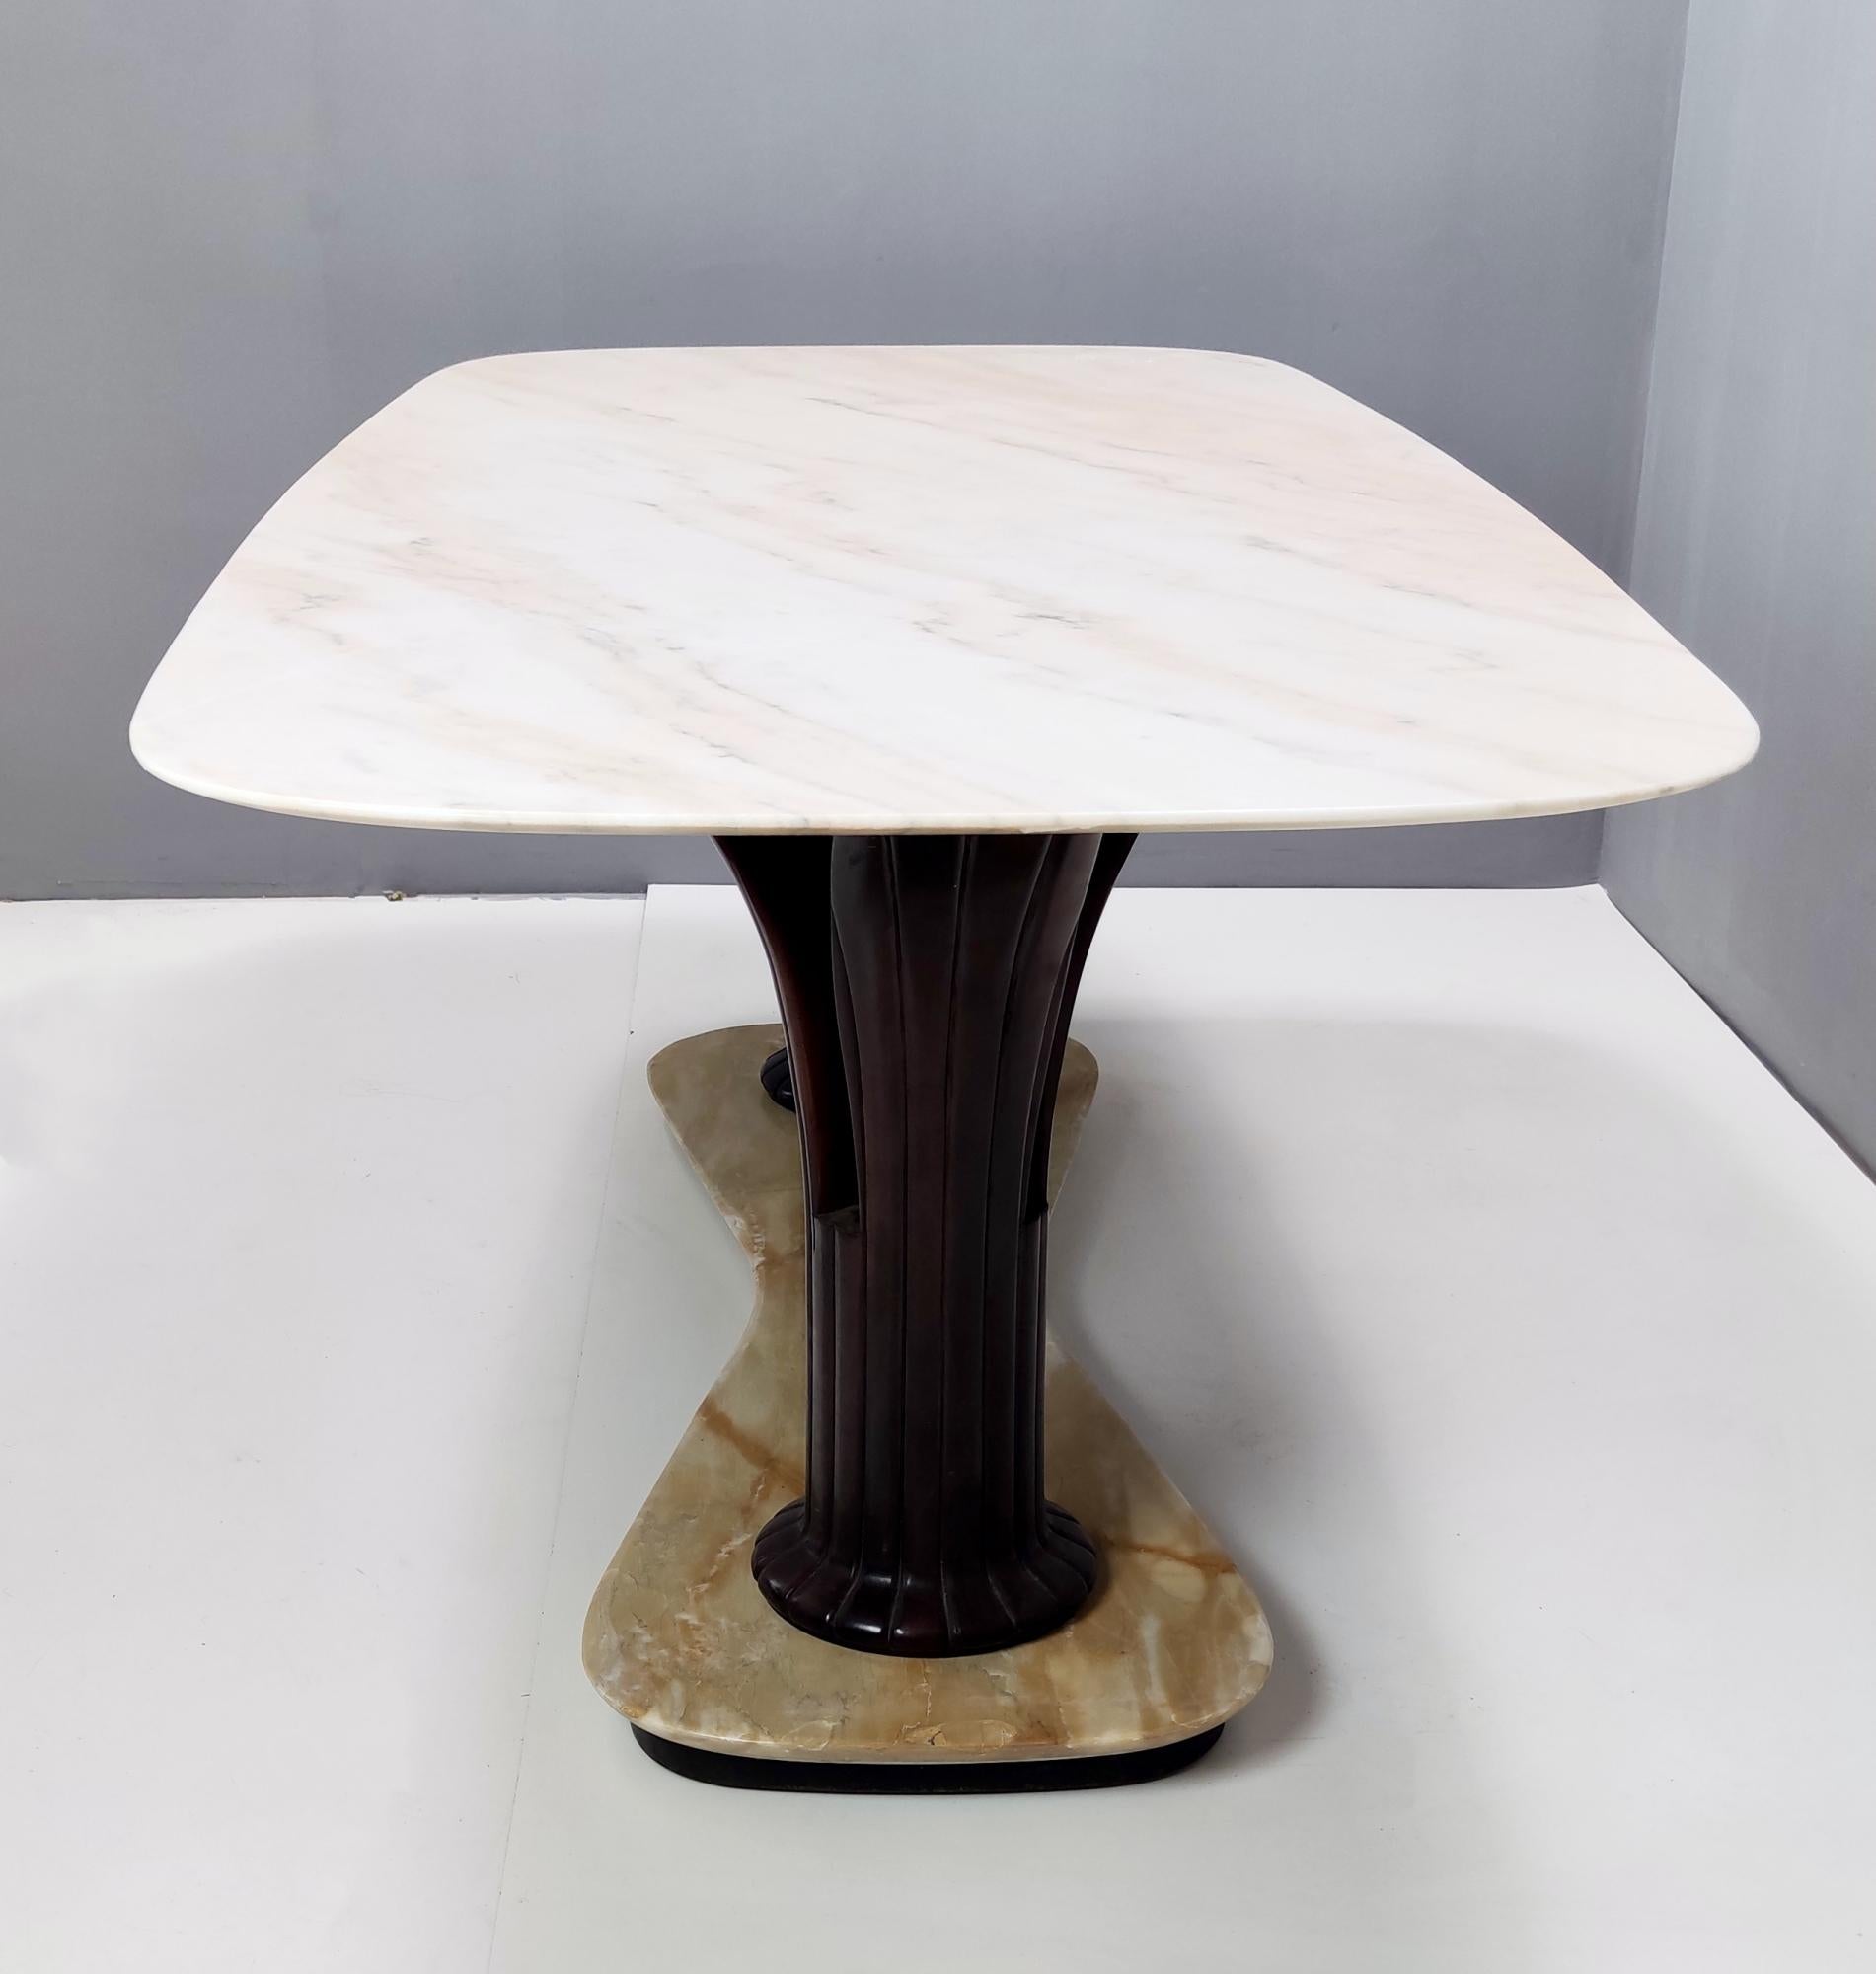 Turned Dining Table Ascribable to Osvaldo Borsani with a Portuguese Pink Marble Top